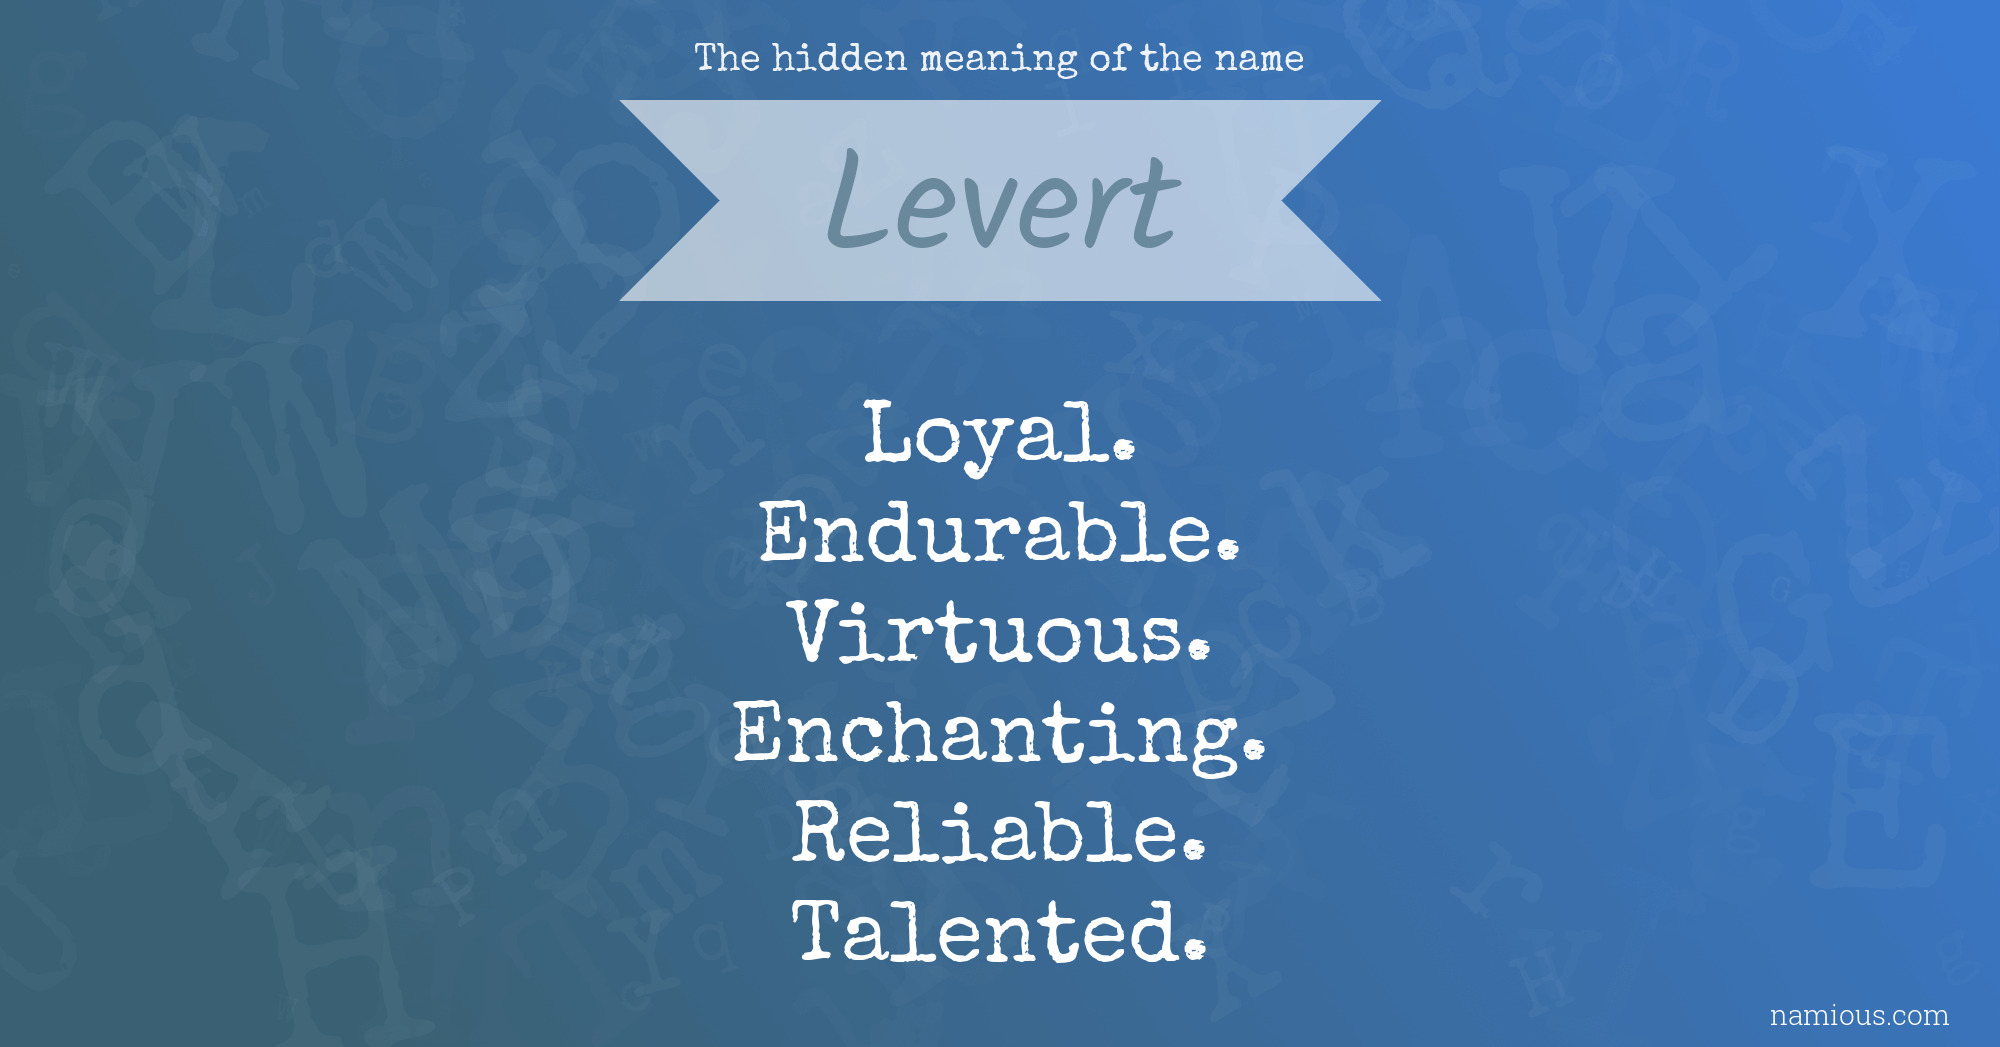 The hidden meaning of the name Levert